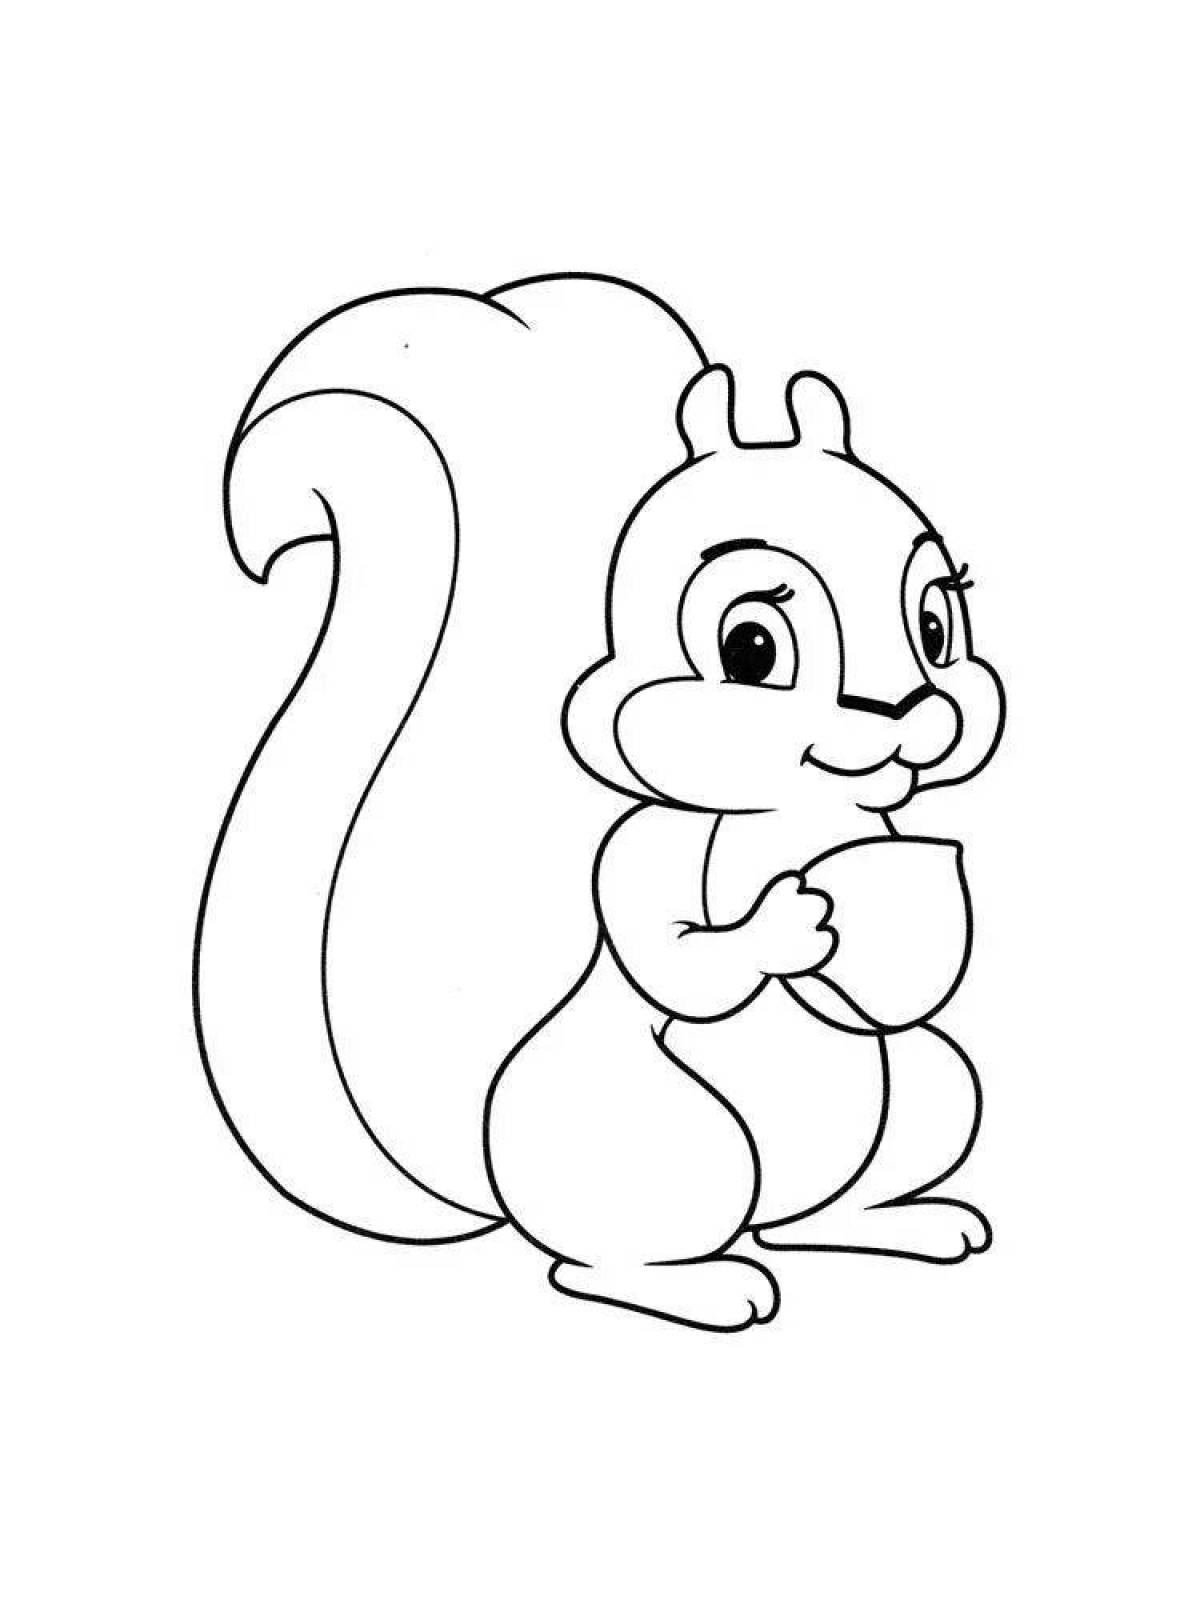 A fun squirrel coloring book for kids